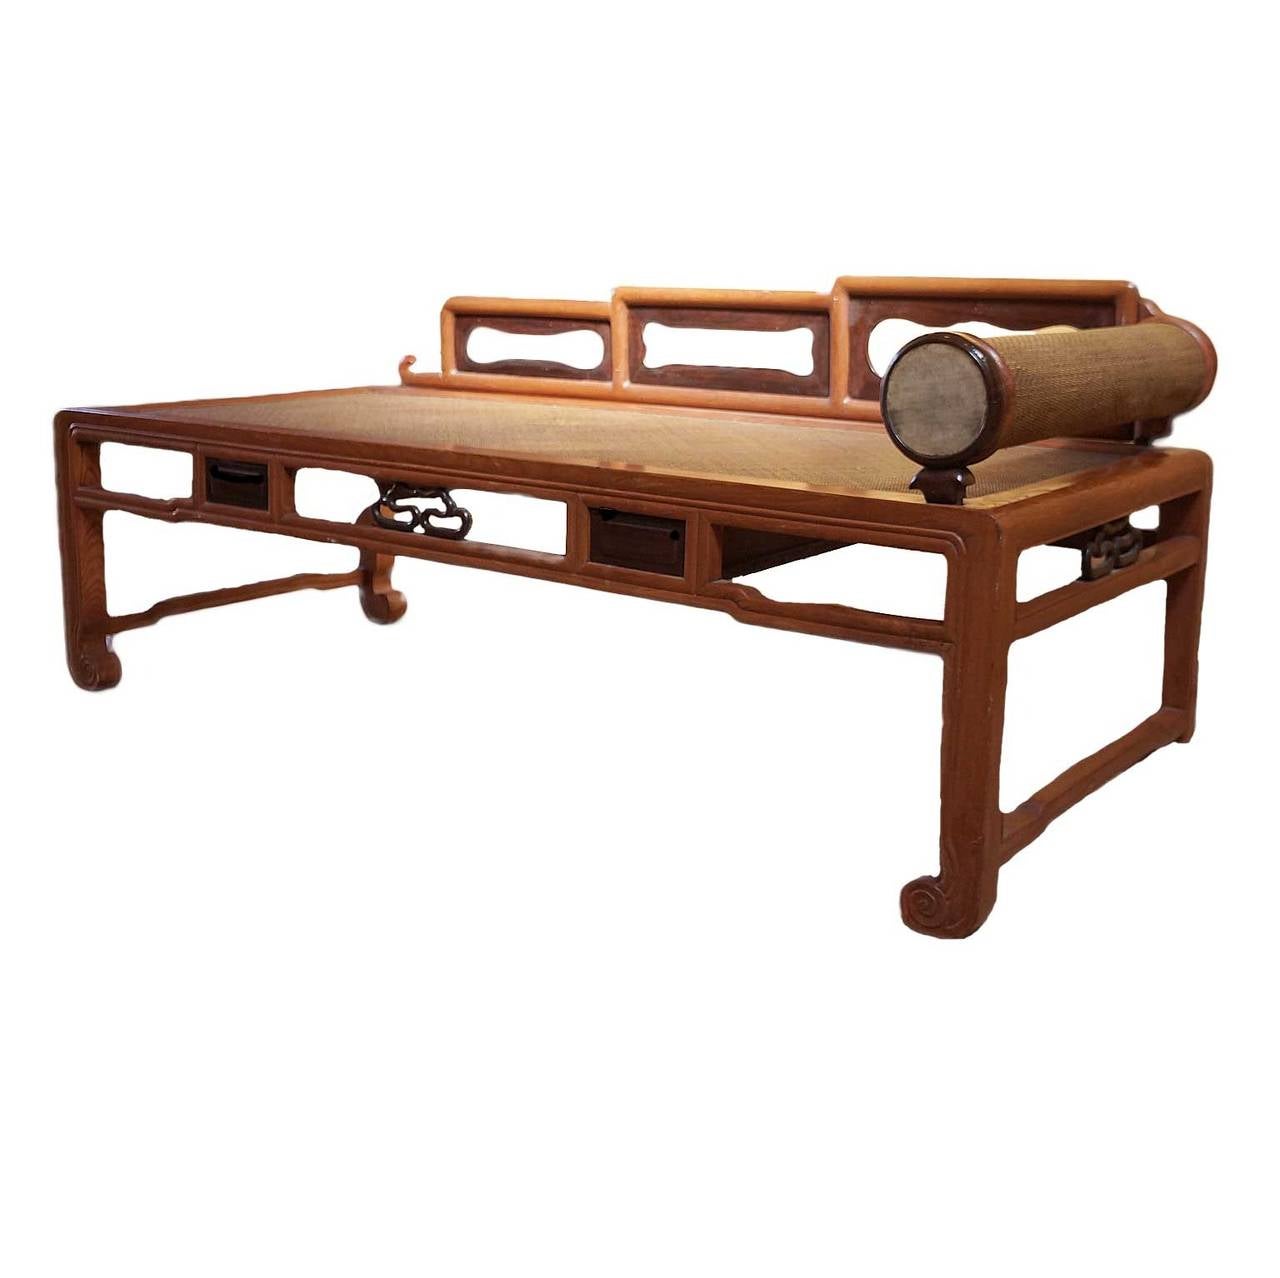 Chinese antique opium bed from the Qing dynasty with finely woven headrest and seat. Headrest finished with a circular piece Chinese marble.